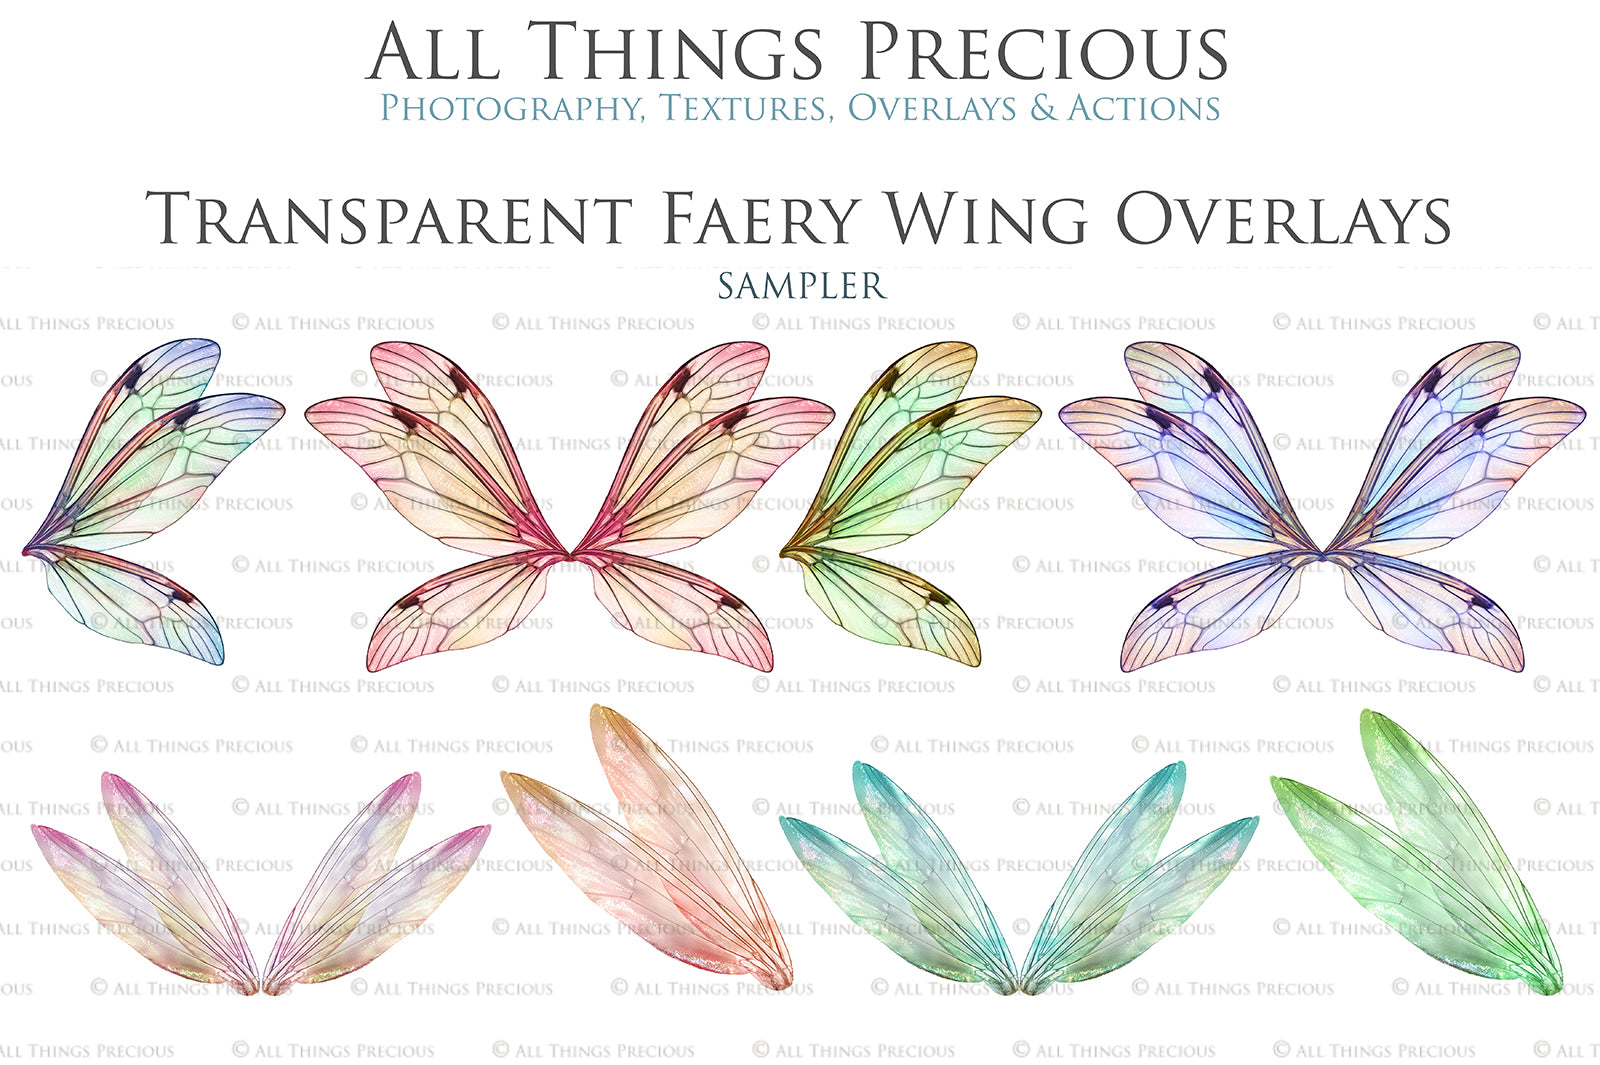 Digital Fairy Wing Overlays clipart. Png transparent see through files for photoshop. Butterfly Angel, Color, Print Photography editing. High resolution, 300dpi. Printable, Photography Graphic design assets, add on stock resources. Magical Scrapbooking design. Fairy Photographer edit. Colorful Big Bundle. ATP Textures.